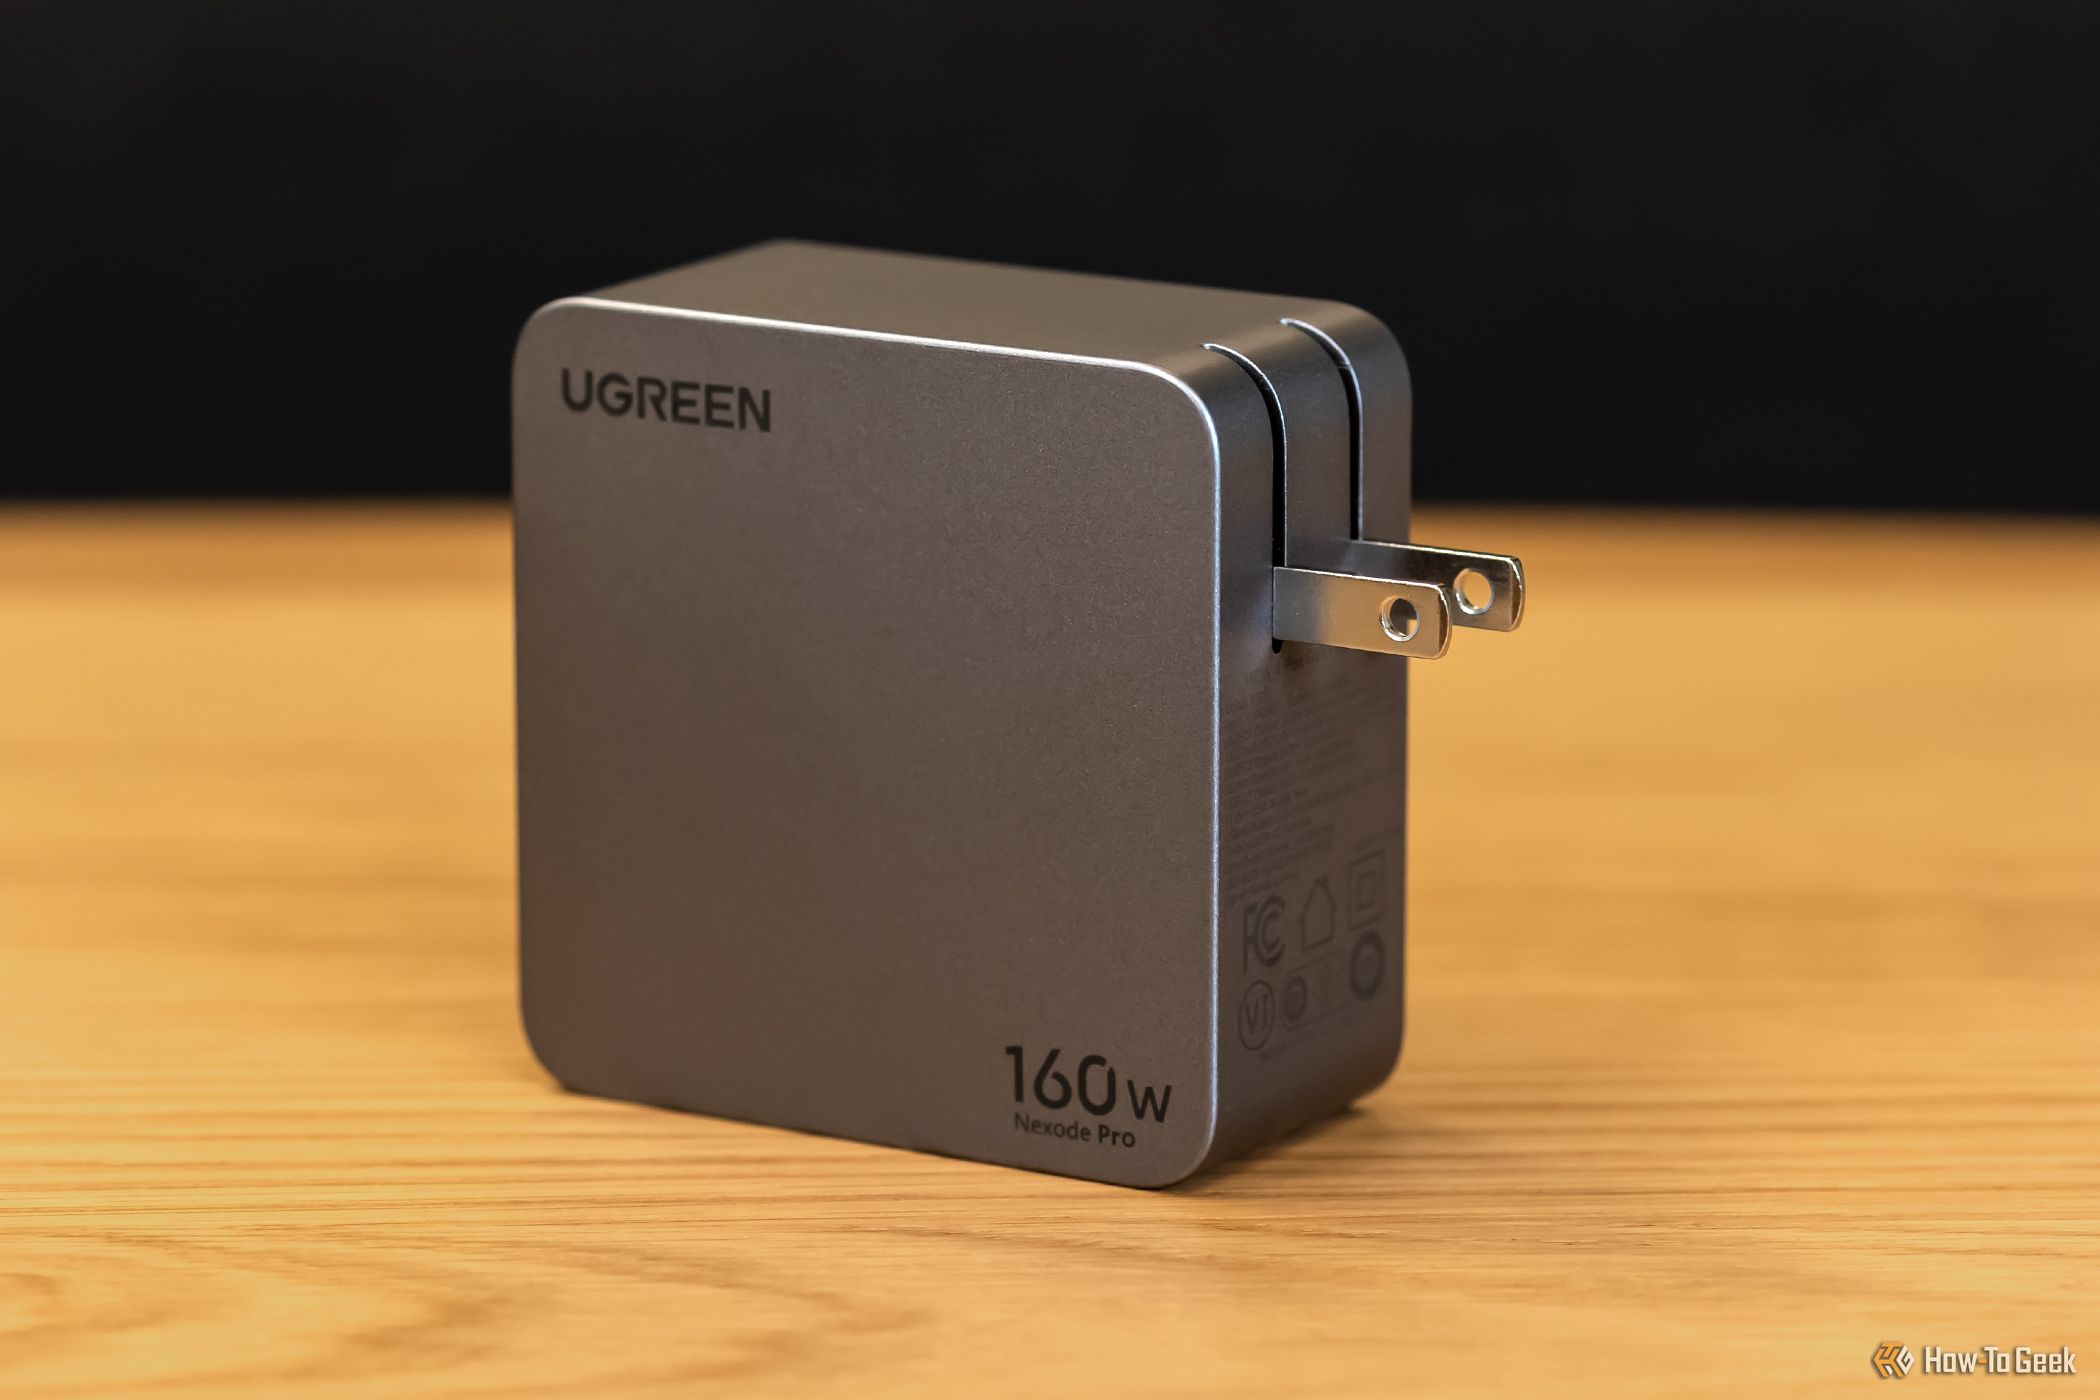 Ugreen Nexode Pro 160W 4-Port GaN Wall Charger Review: Portable Power